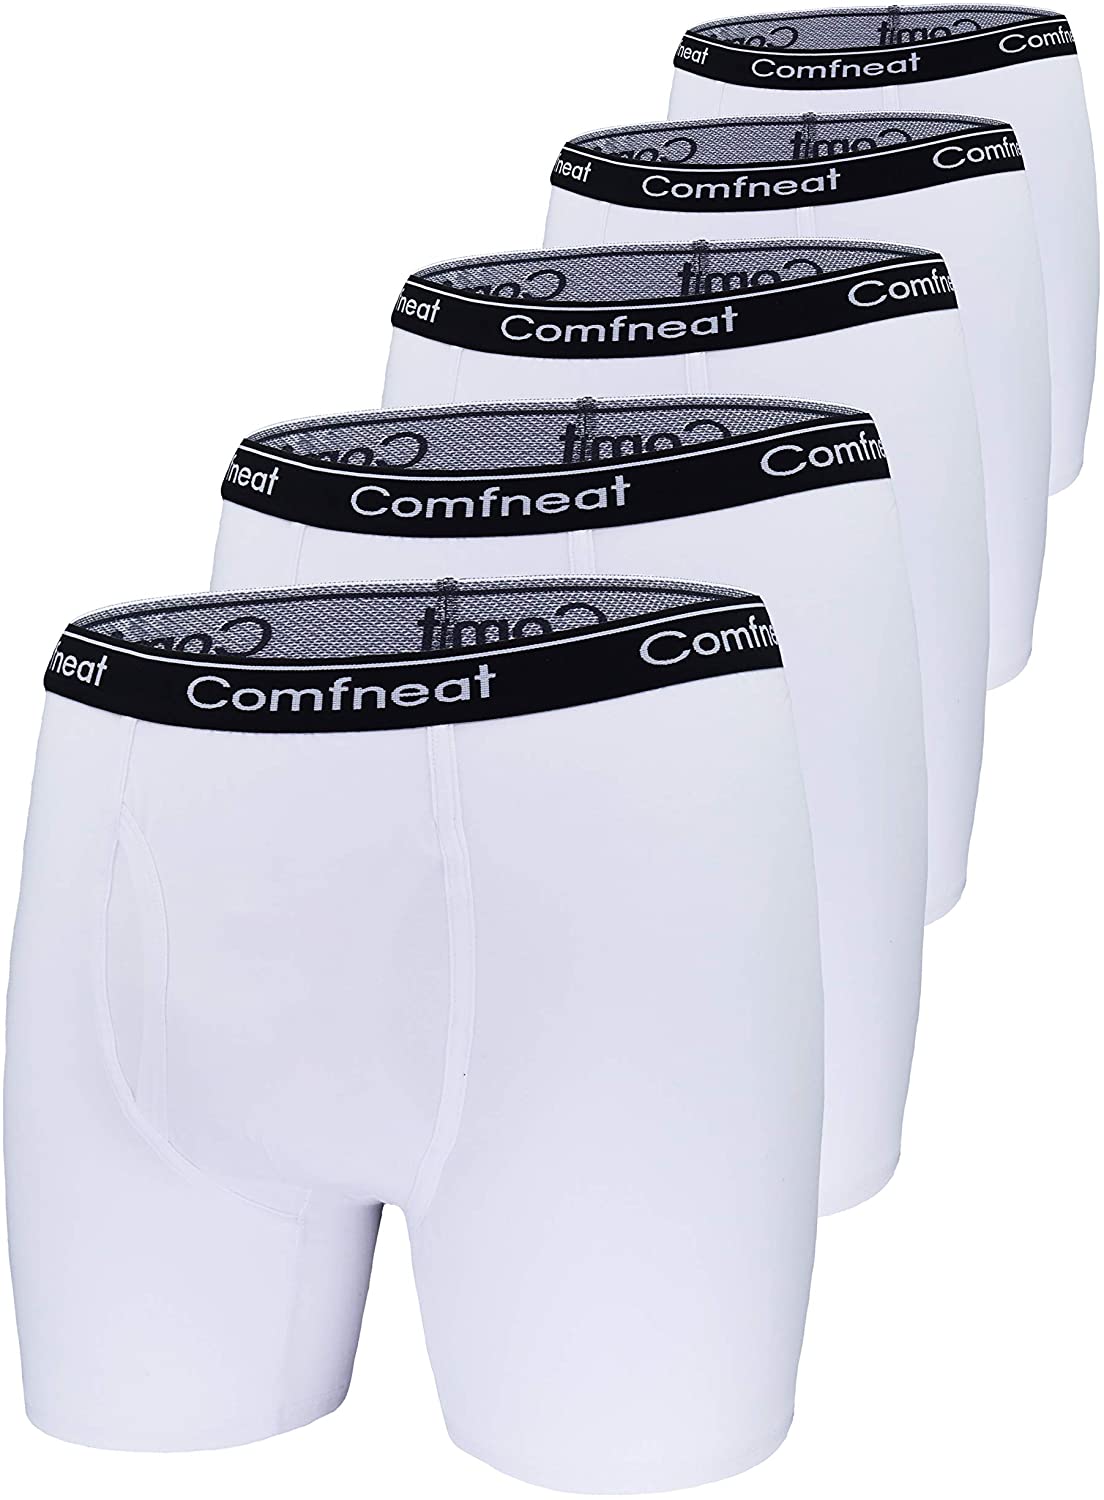 Comfneat Mens 2 or 5-Pack Big & Tall Boxer Briefs Cotton Spandex 3XL-7XL Underwear with Fly 